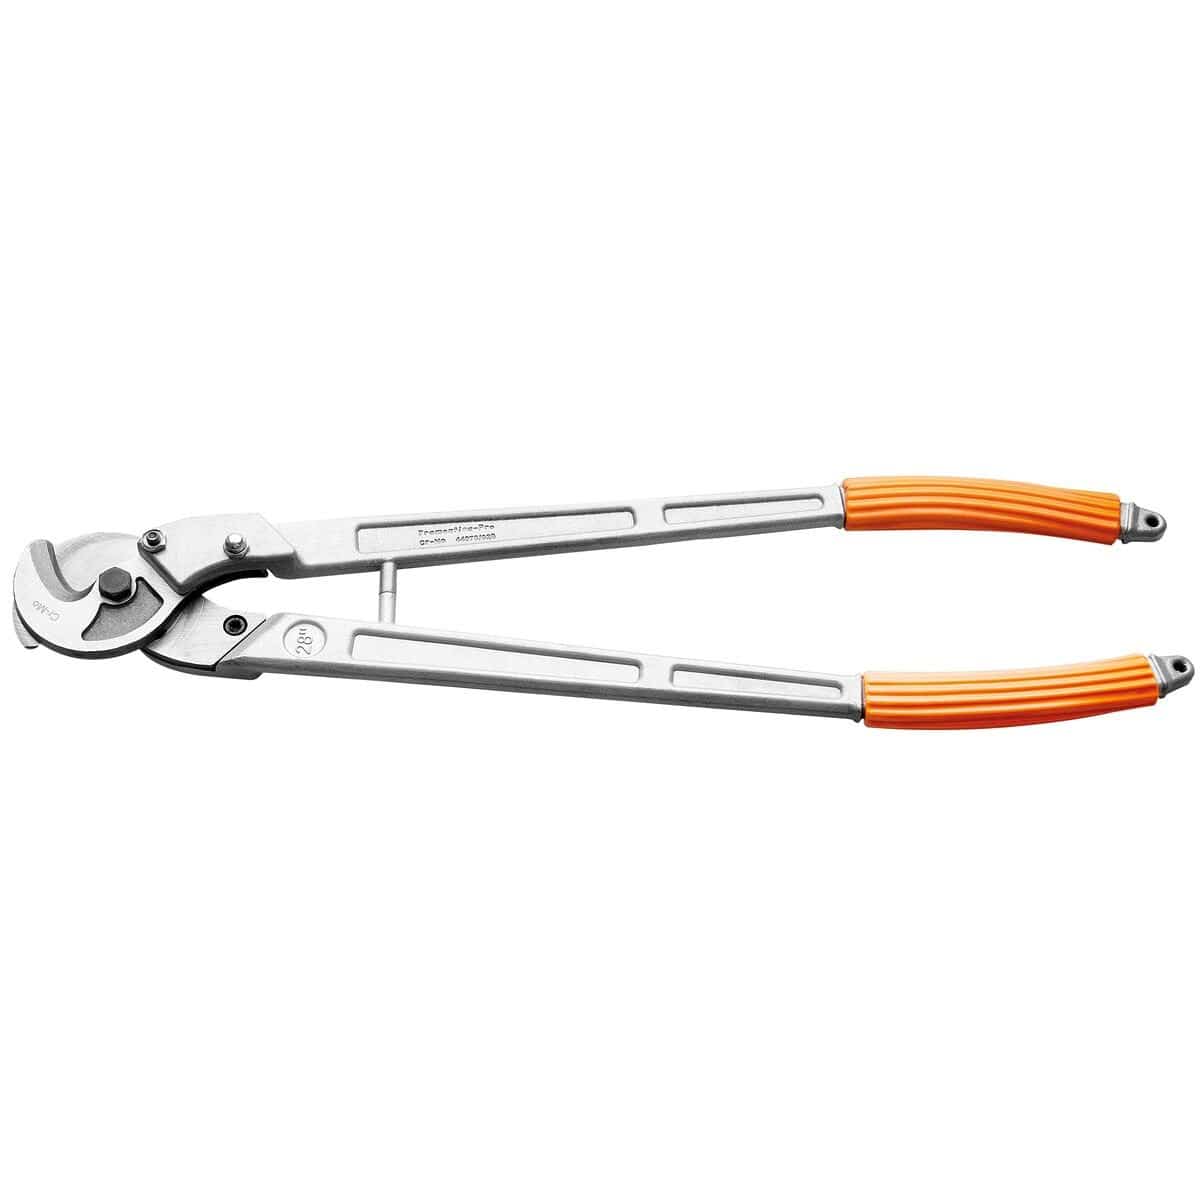 Tramontina Cable Cutter Scissors - 24" & 32" | Supply Master | Accra, Ghana Tools Building Steel Engineering Hardware tool